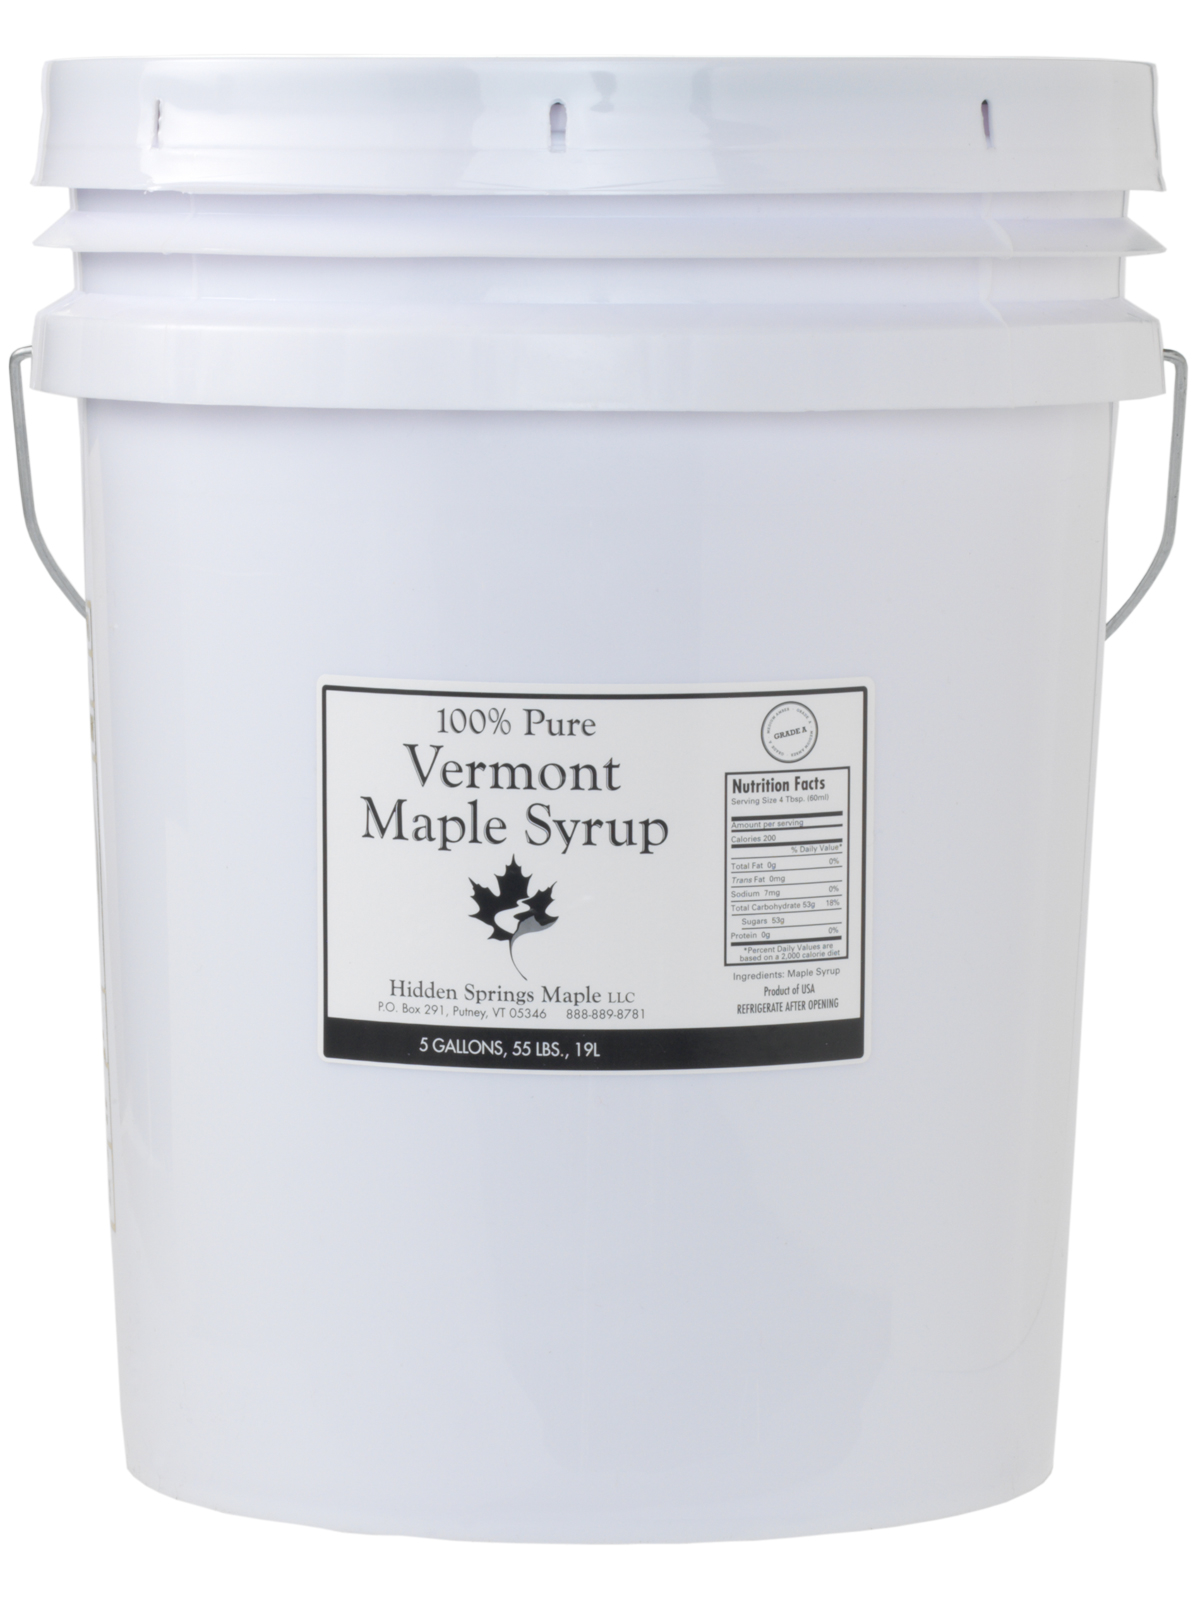 5 Gallon Bucket with Lids at Wholesale Prices 